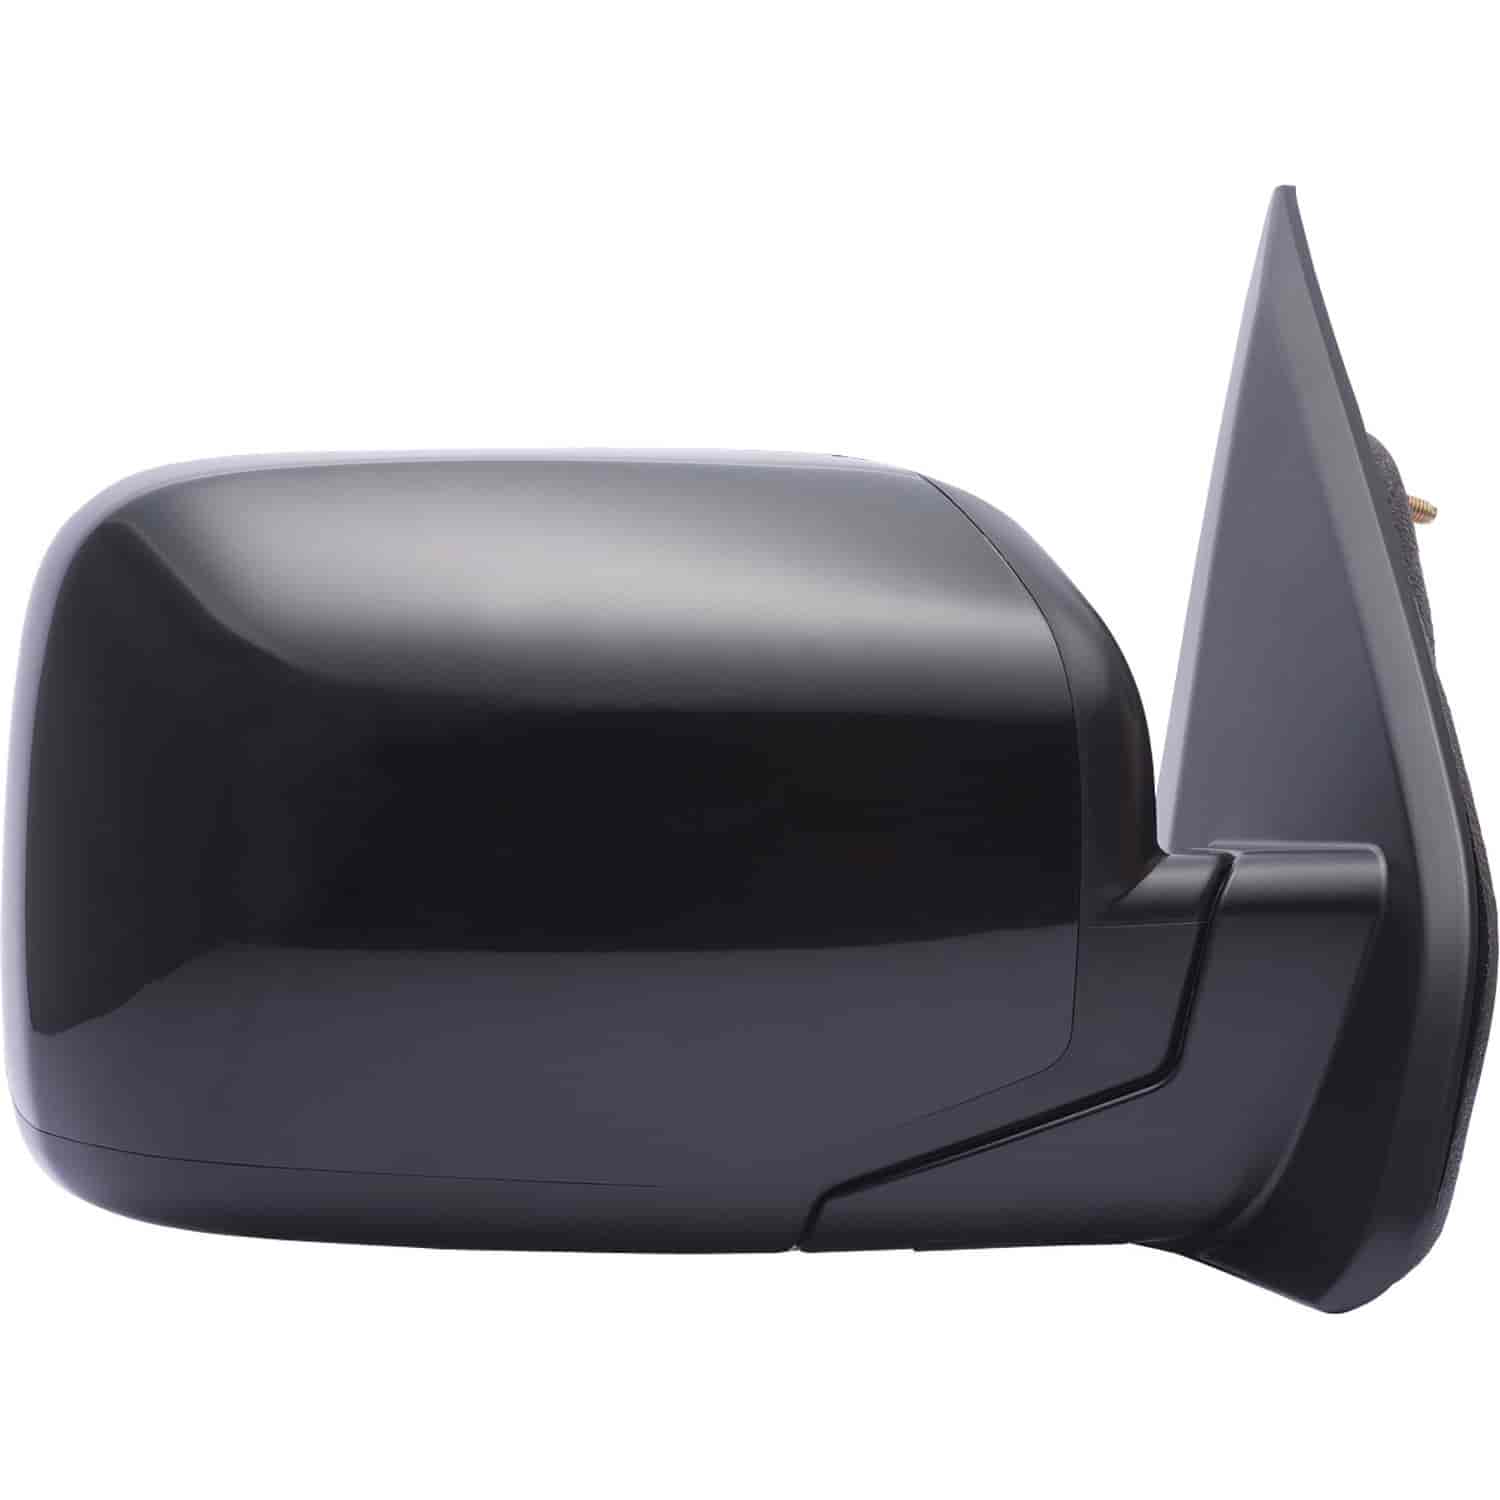 OEM Style Replacement mirror for 09-14 Honda Pilot passenger side mirror tested to fit and function